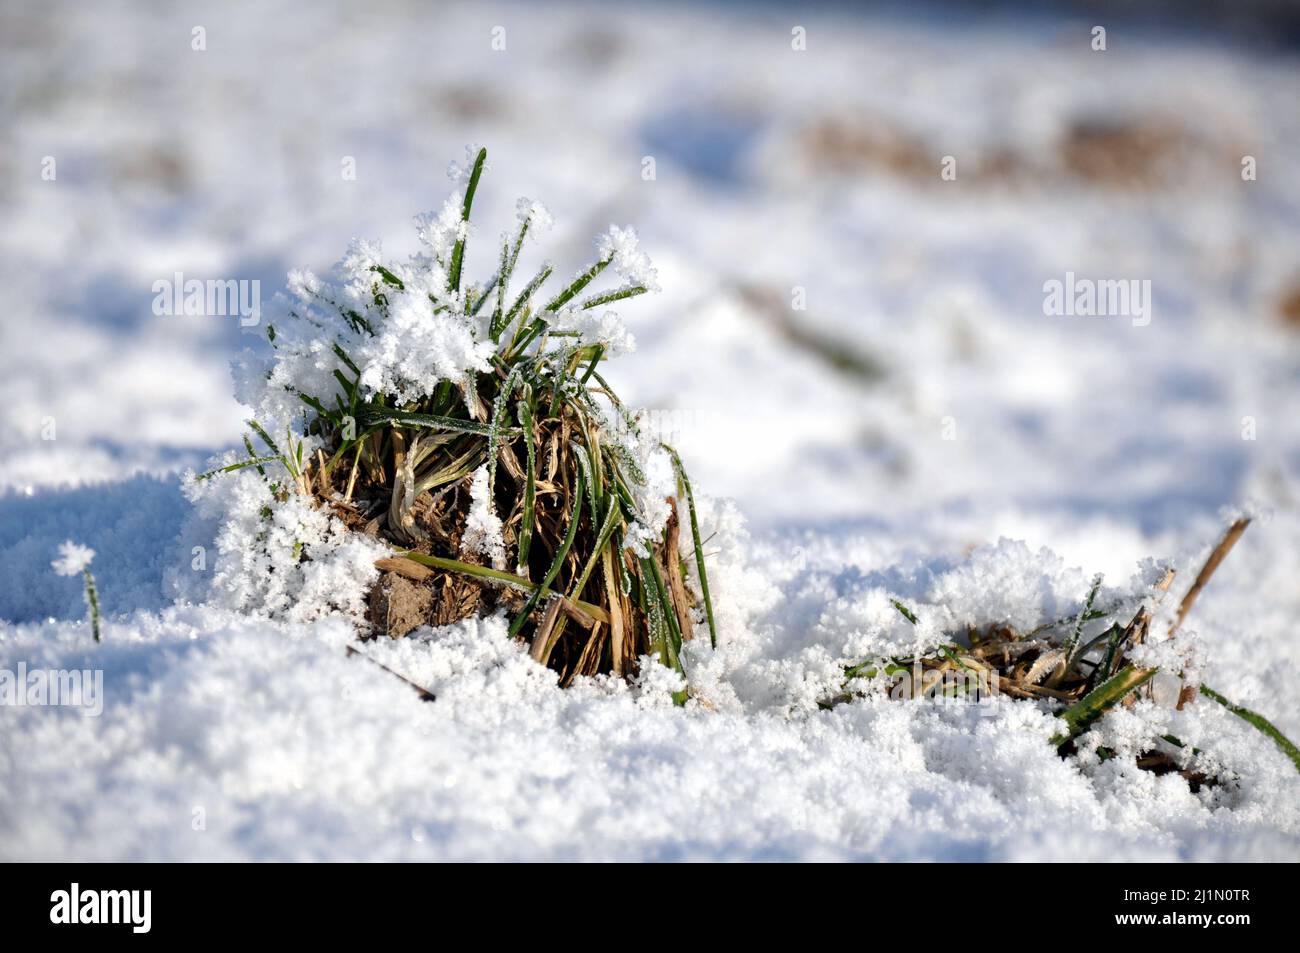 A tuft of frozen grass covered with white snowflakes on a winter morning, Poland Stock Photo